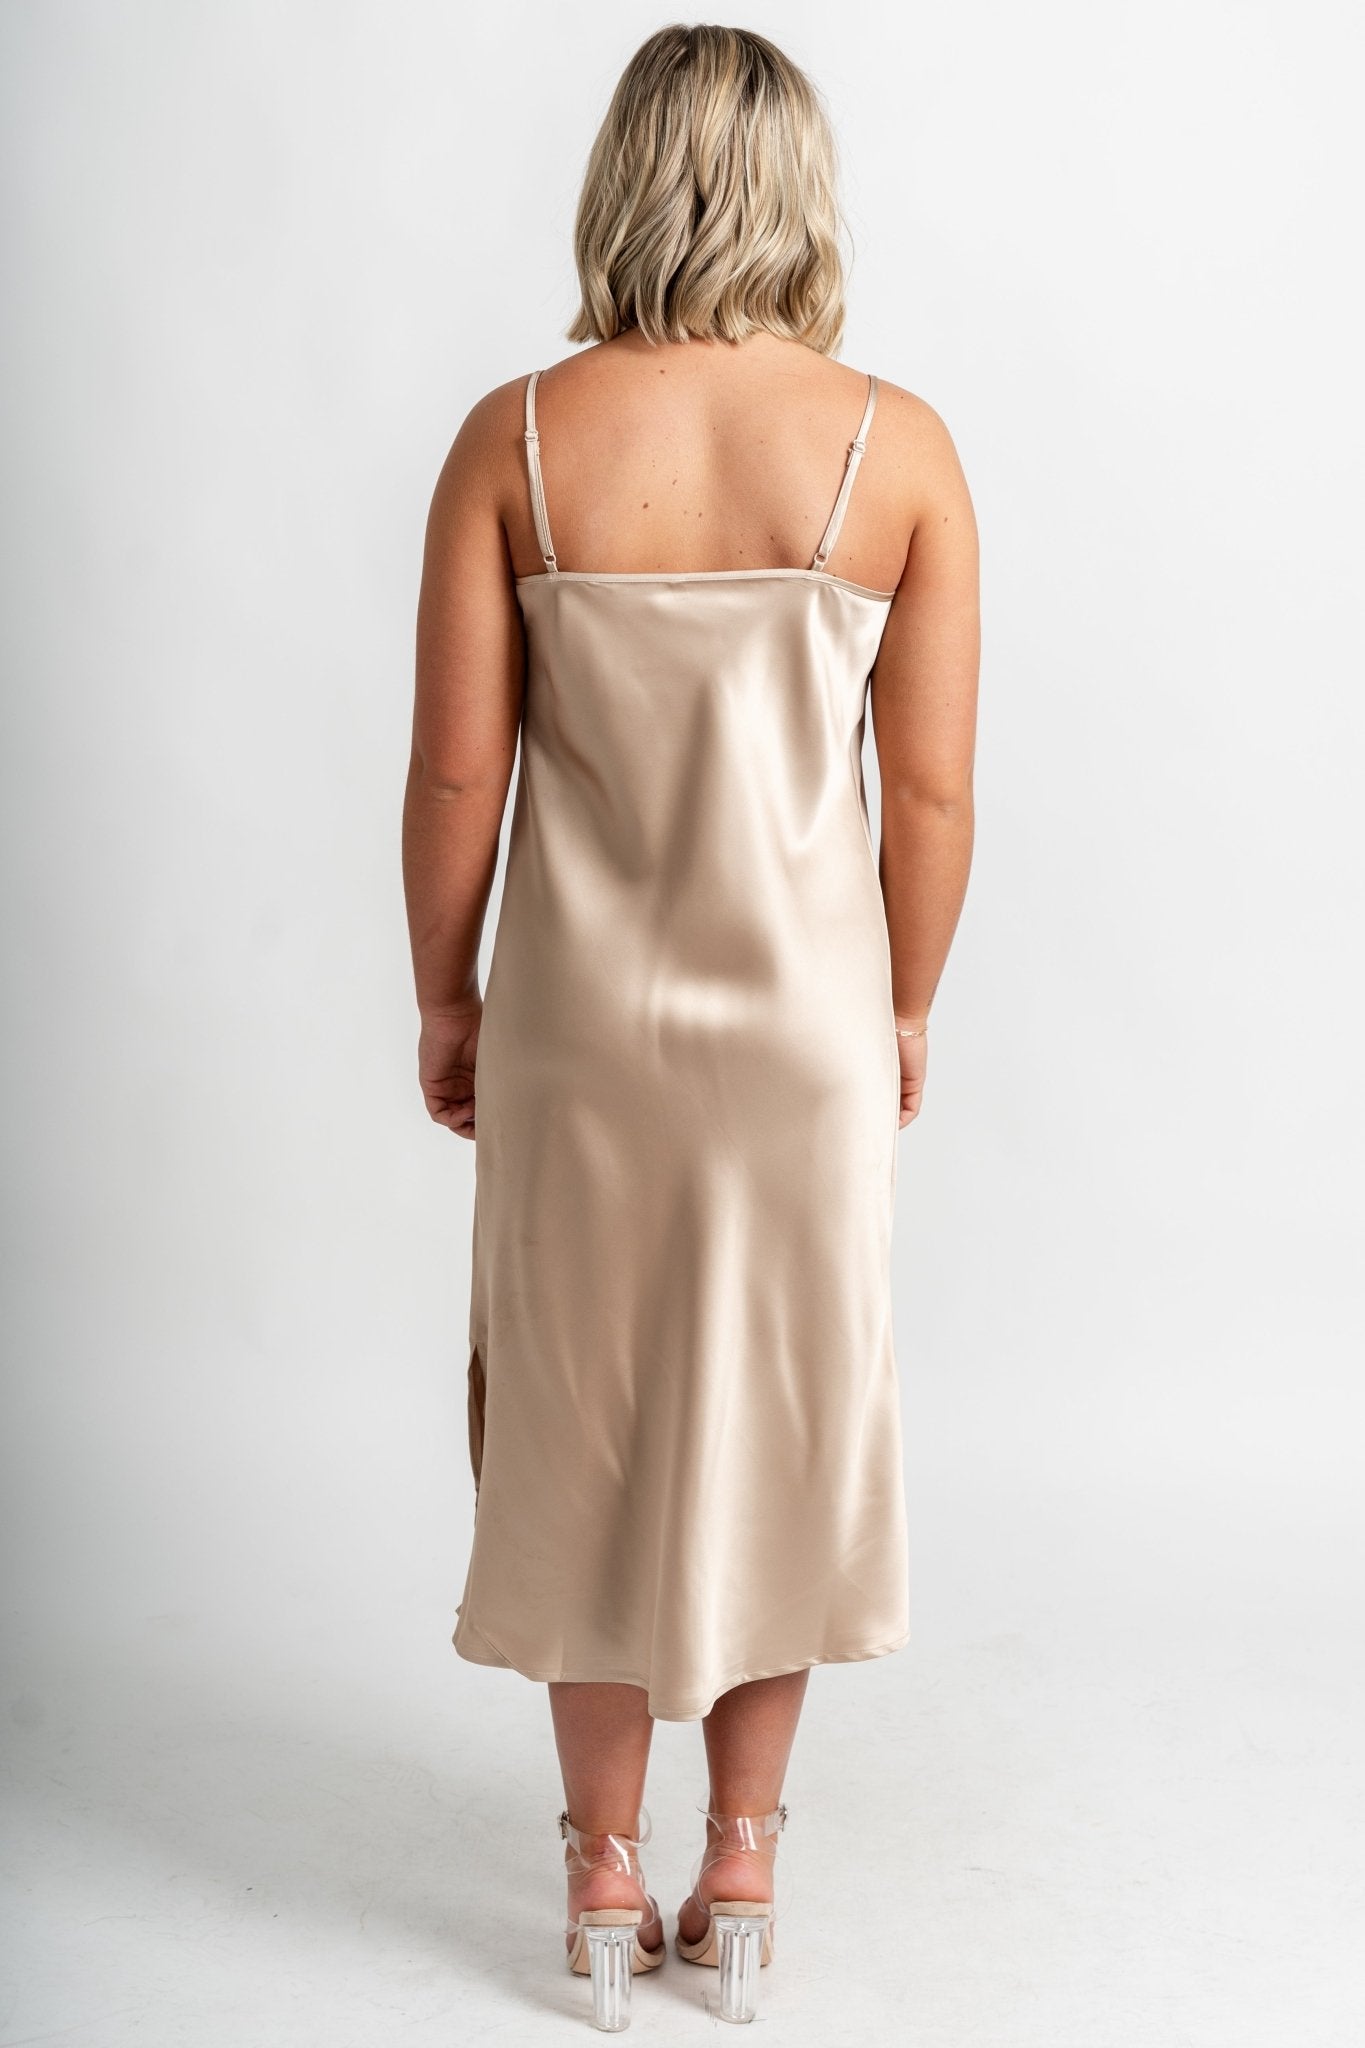 Satin slip midi dress taupe - Affordable dress - Boutique Dresses at Lush Fashion Lounge Boutique in Oklahoma City